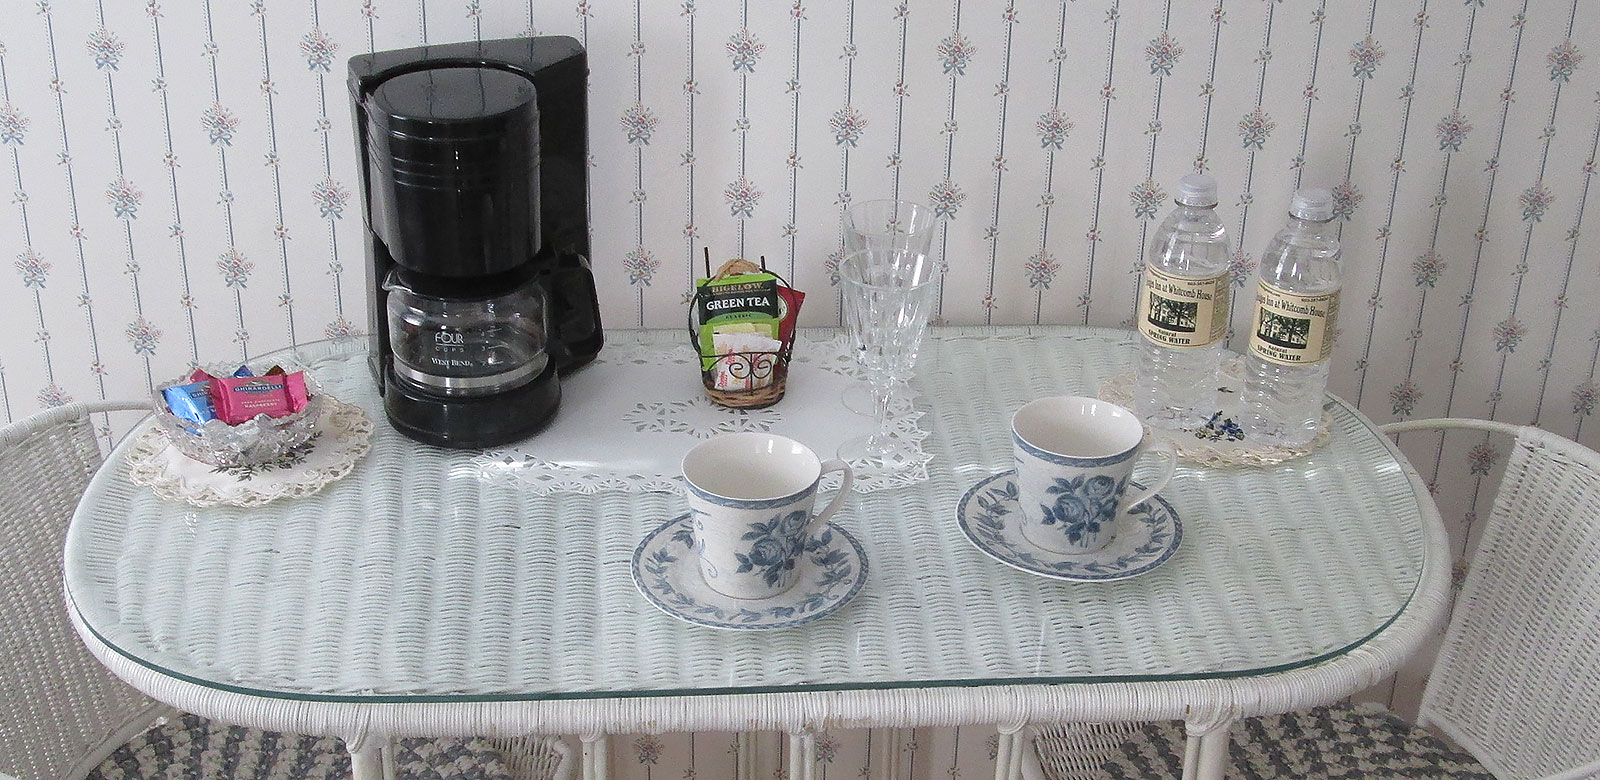 Wicker table with coffee maker, tea cups, bottled water, and a bowl of chocolates